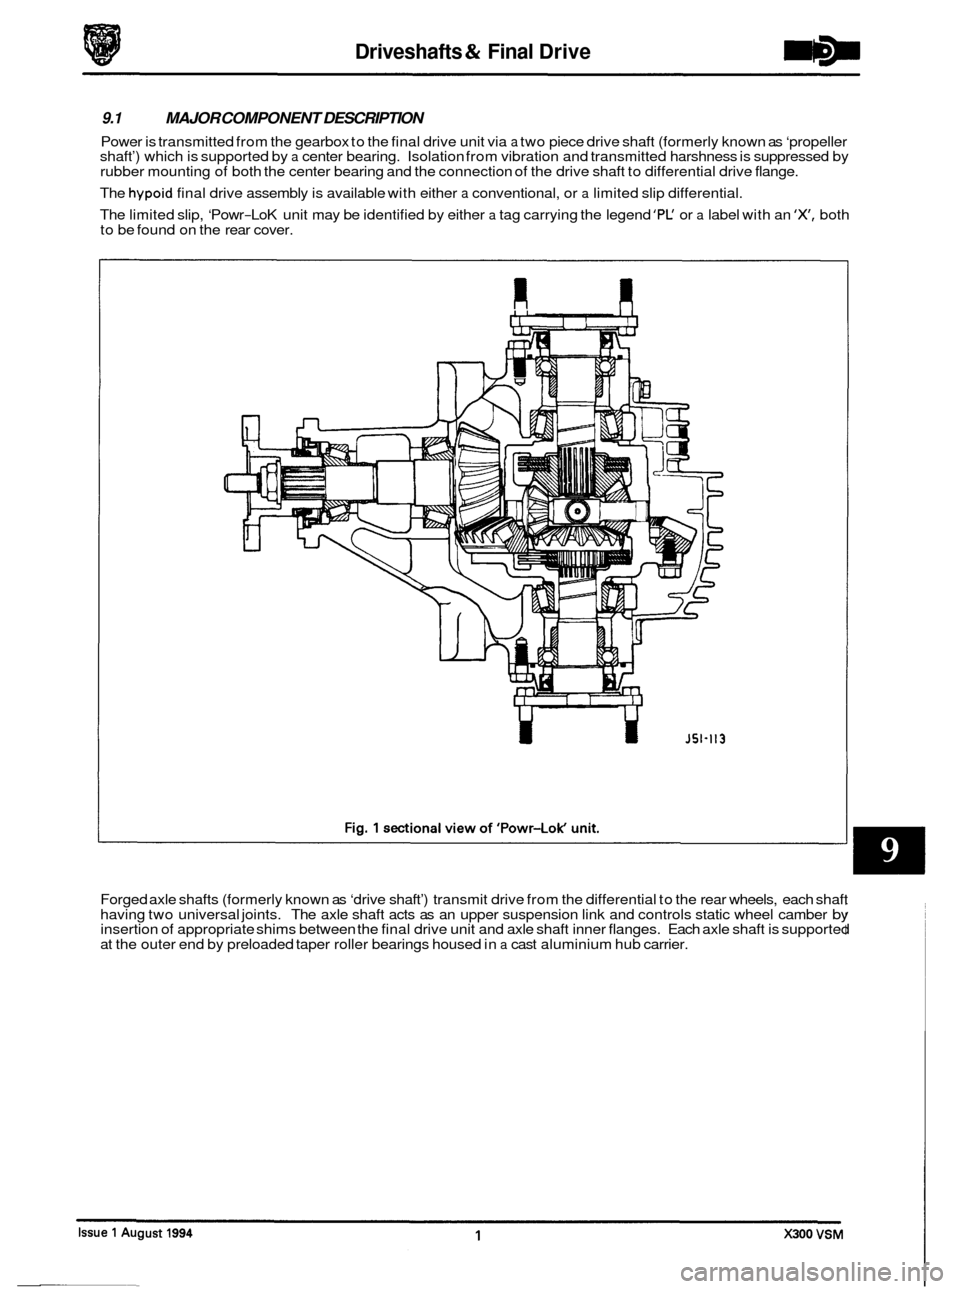 JAGUAR XJ6 1994 2.G Workshop Manual Driveshafts & Final Drive 
9.1 MAJOR  COMPONENT  DESCRIPTION 
Power is transmitted  from the gearbox  to the  final  drive unit via a two piece  drive shaft  (formerly known  as ‘propeller 
shaft’